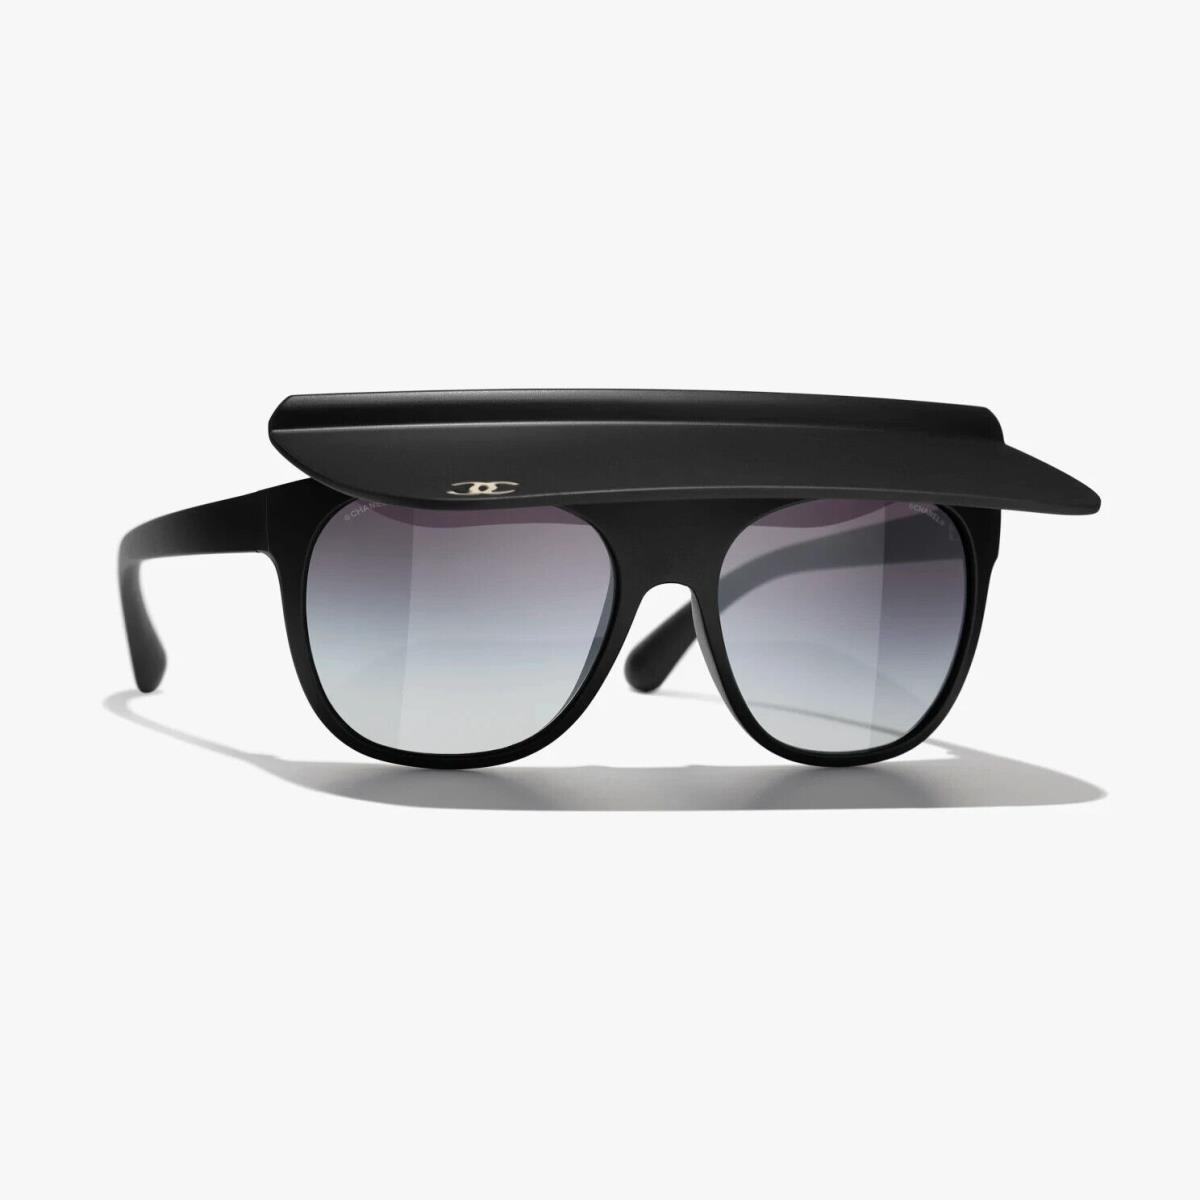 Chanel 2021 Cruise Collection A71046 Black Limited Edition Visor Sunglasses